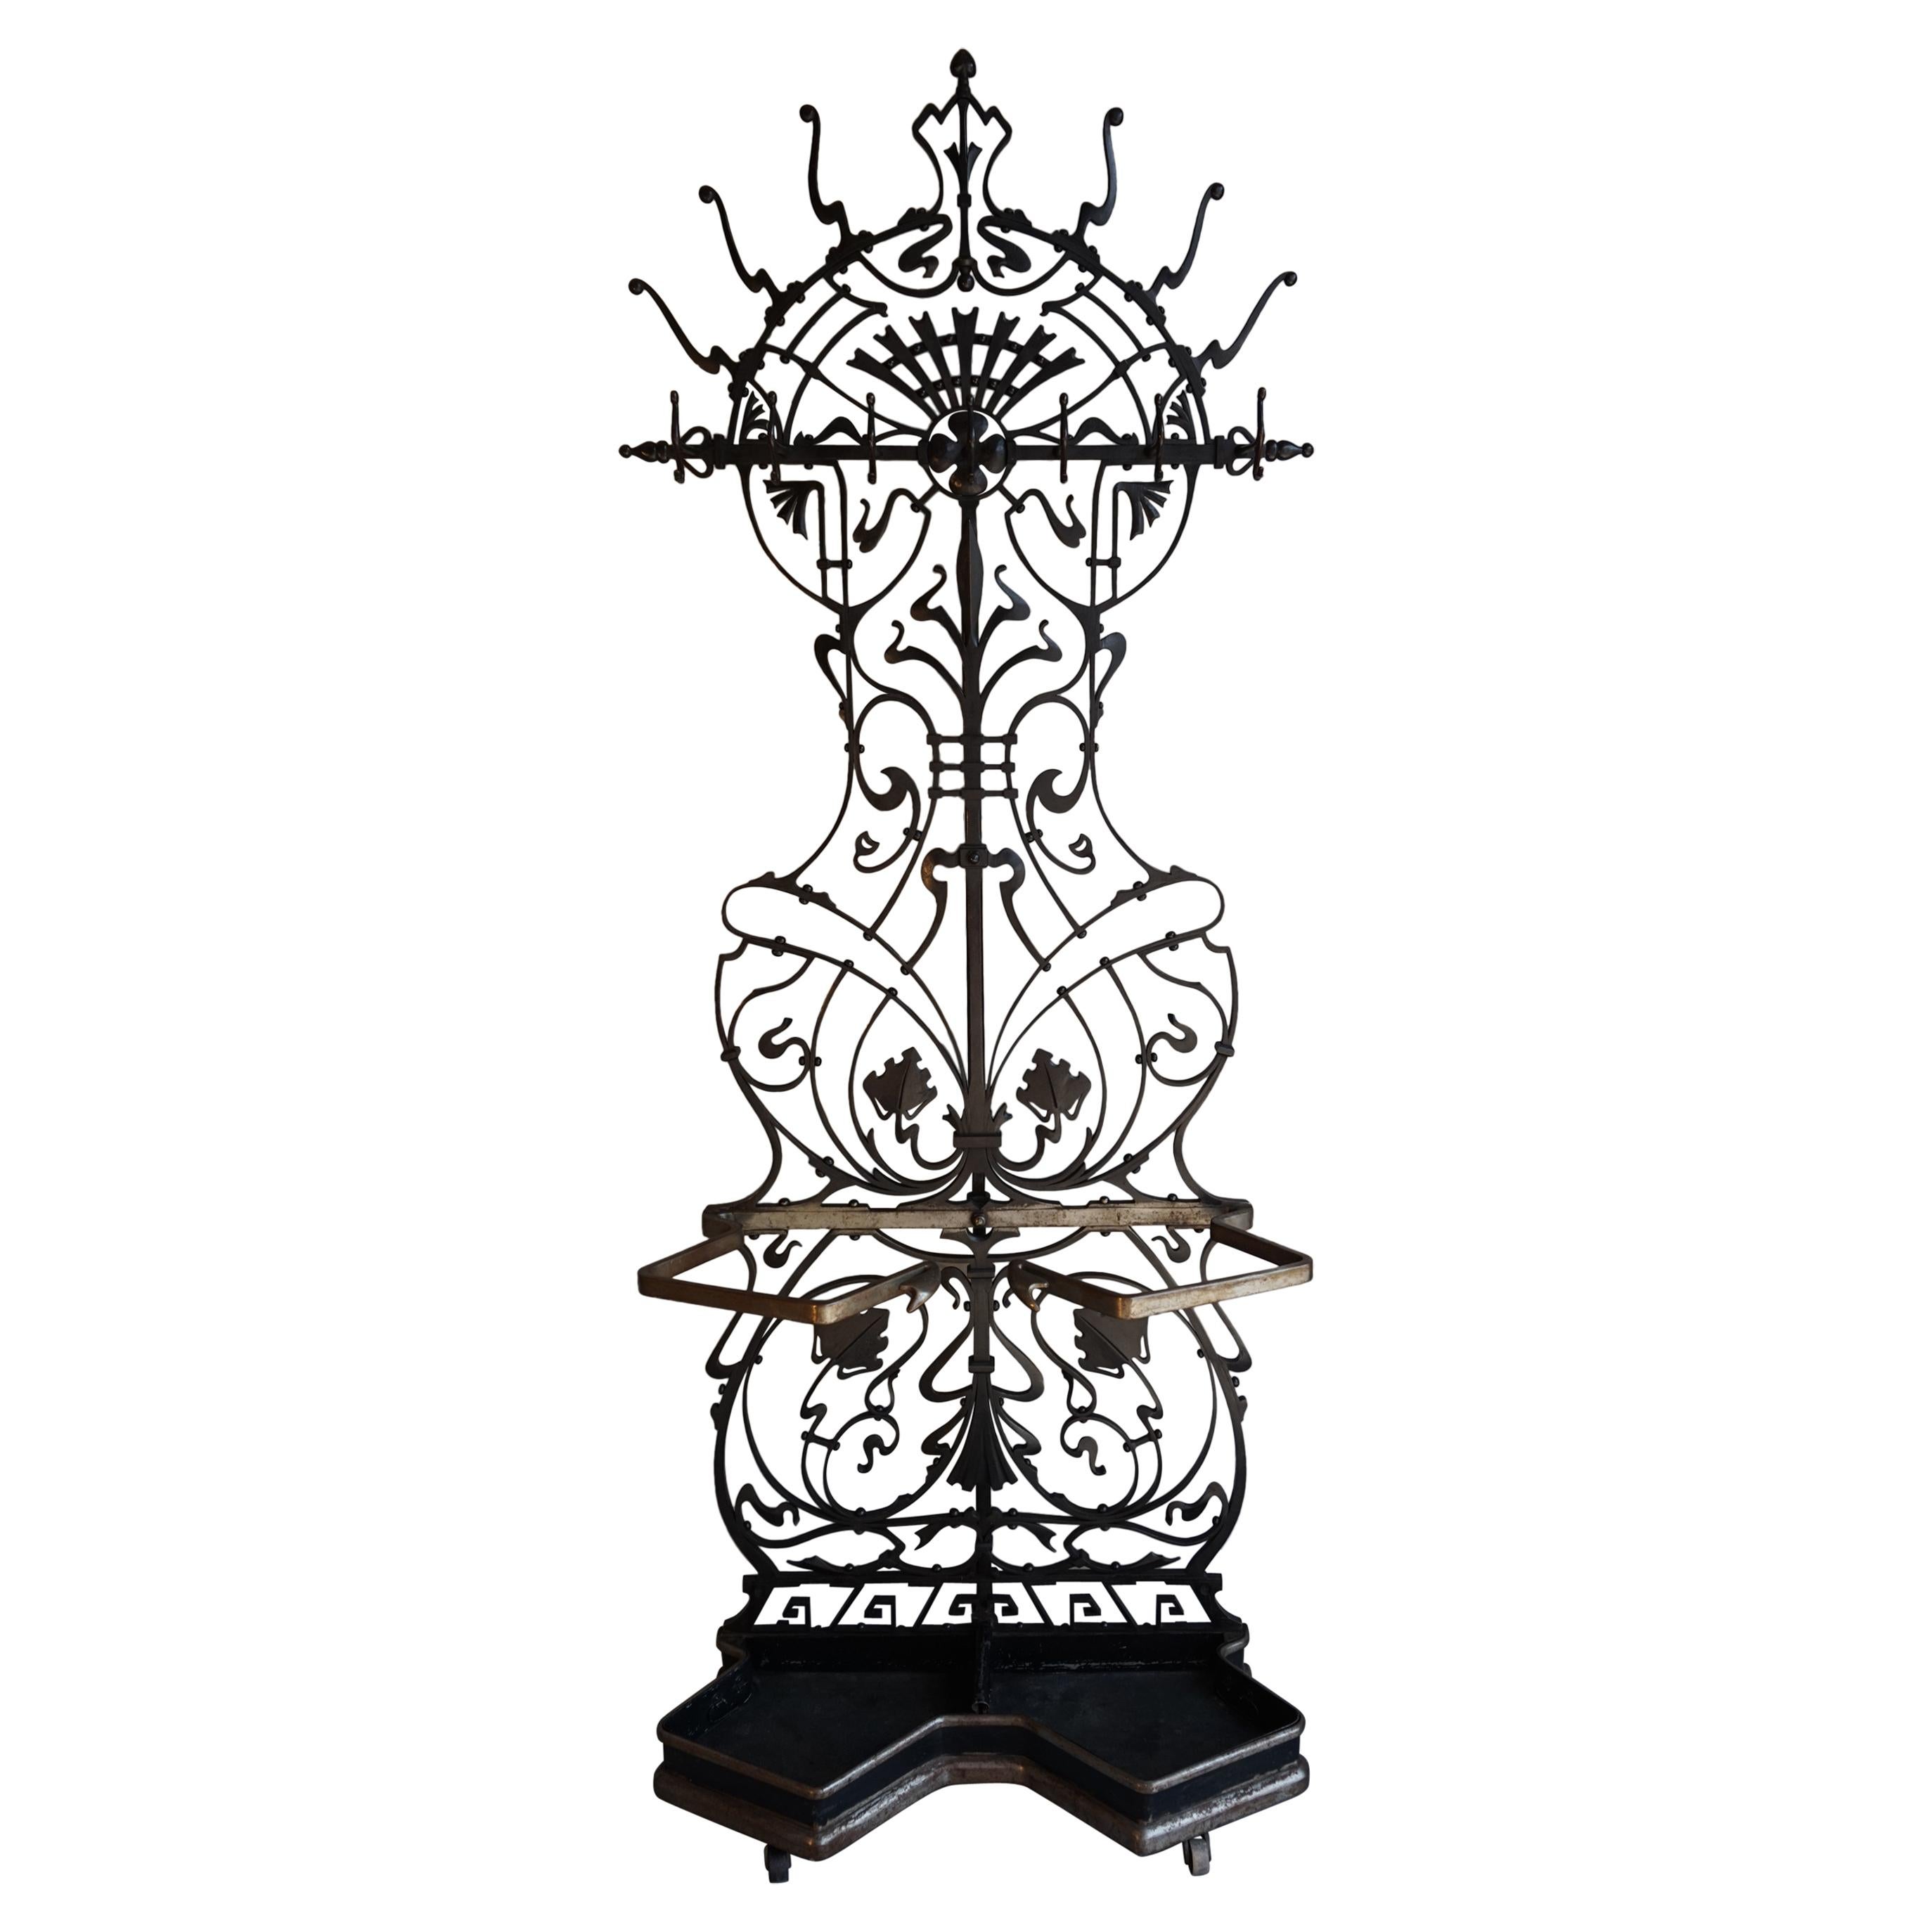 Superb Arts & Crafts Hand Forged Wrought Iron Hall Coat Rack and Umbrella Stand For Sale